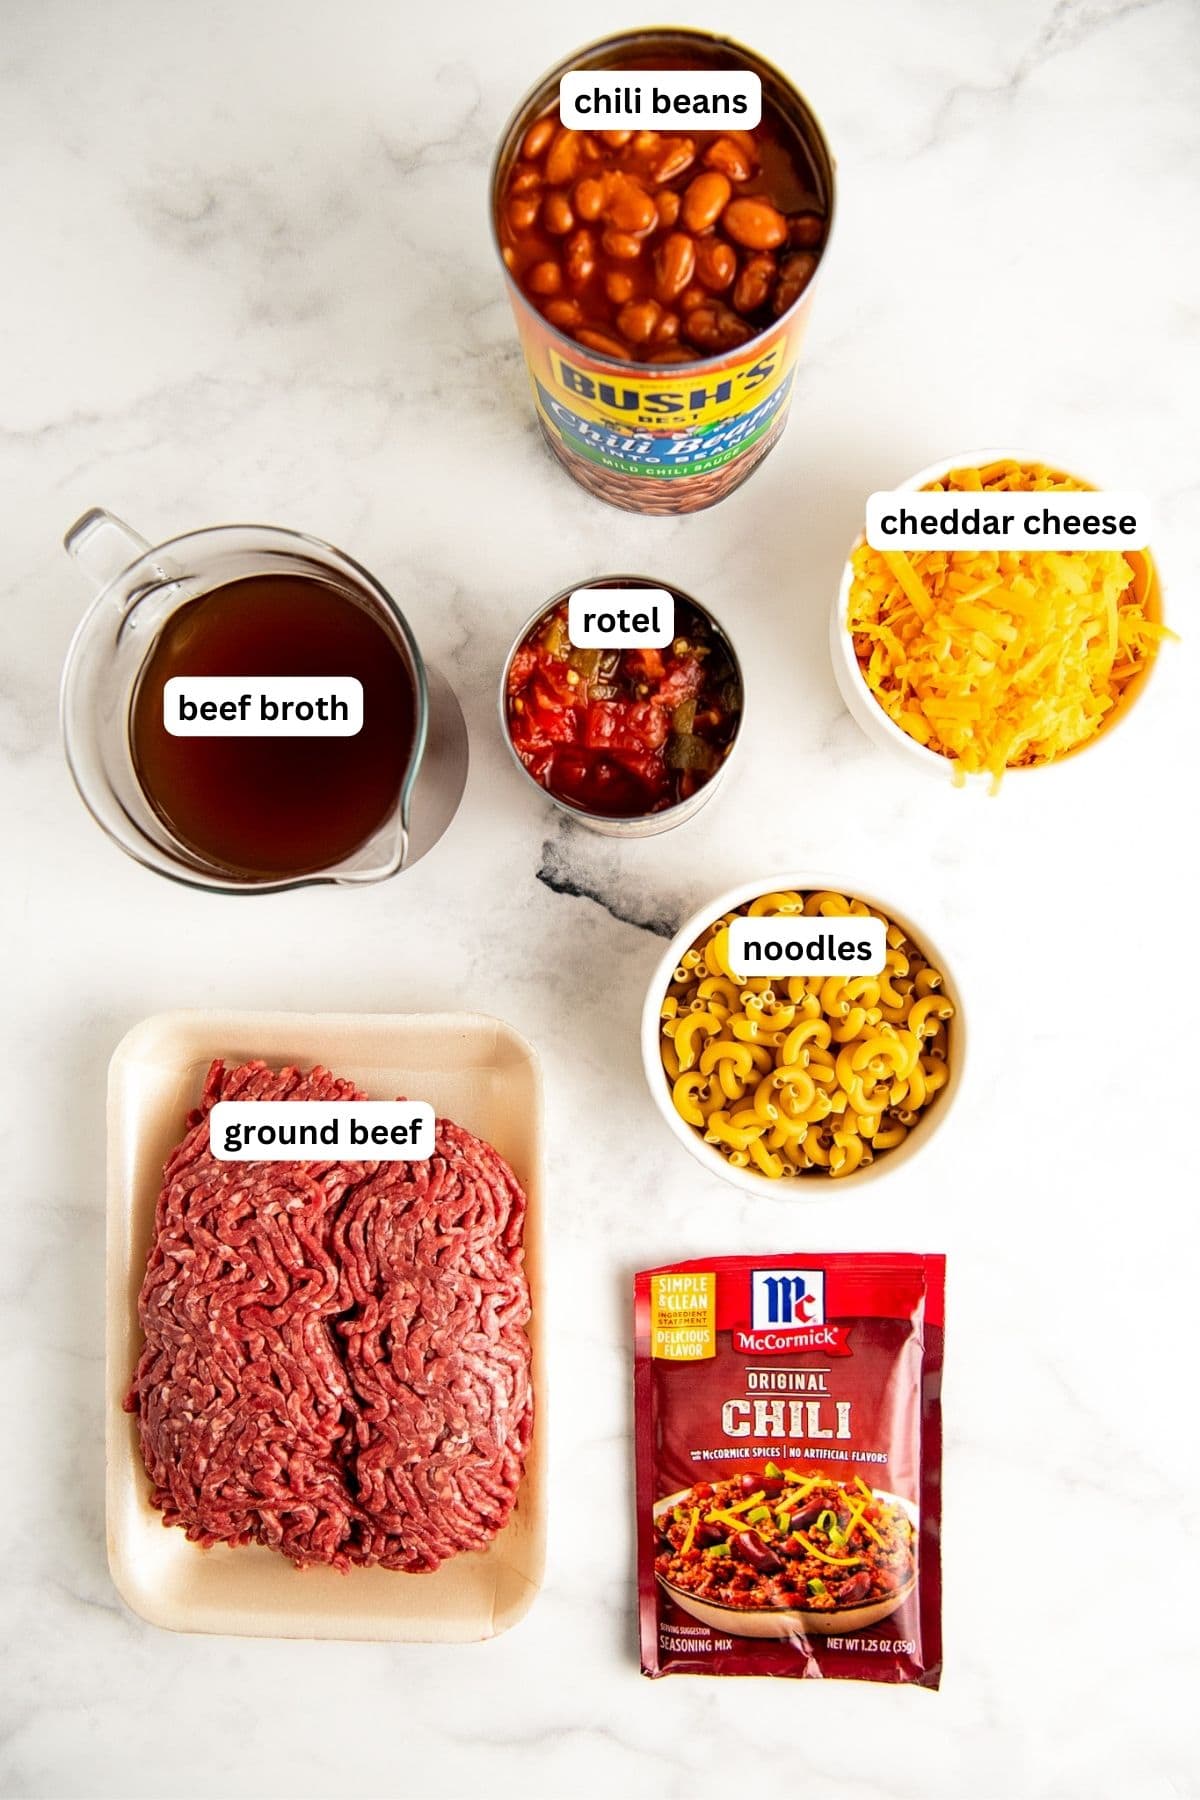 Ingredients to make crockpot chili mac & cheese recipe, from top to bottom: chili beans, cheddar cheese, rotel, beef broth, noodles, ground beef and chili seasoning.